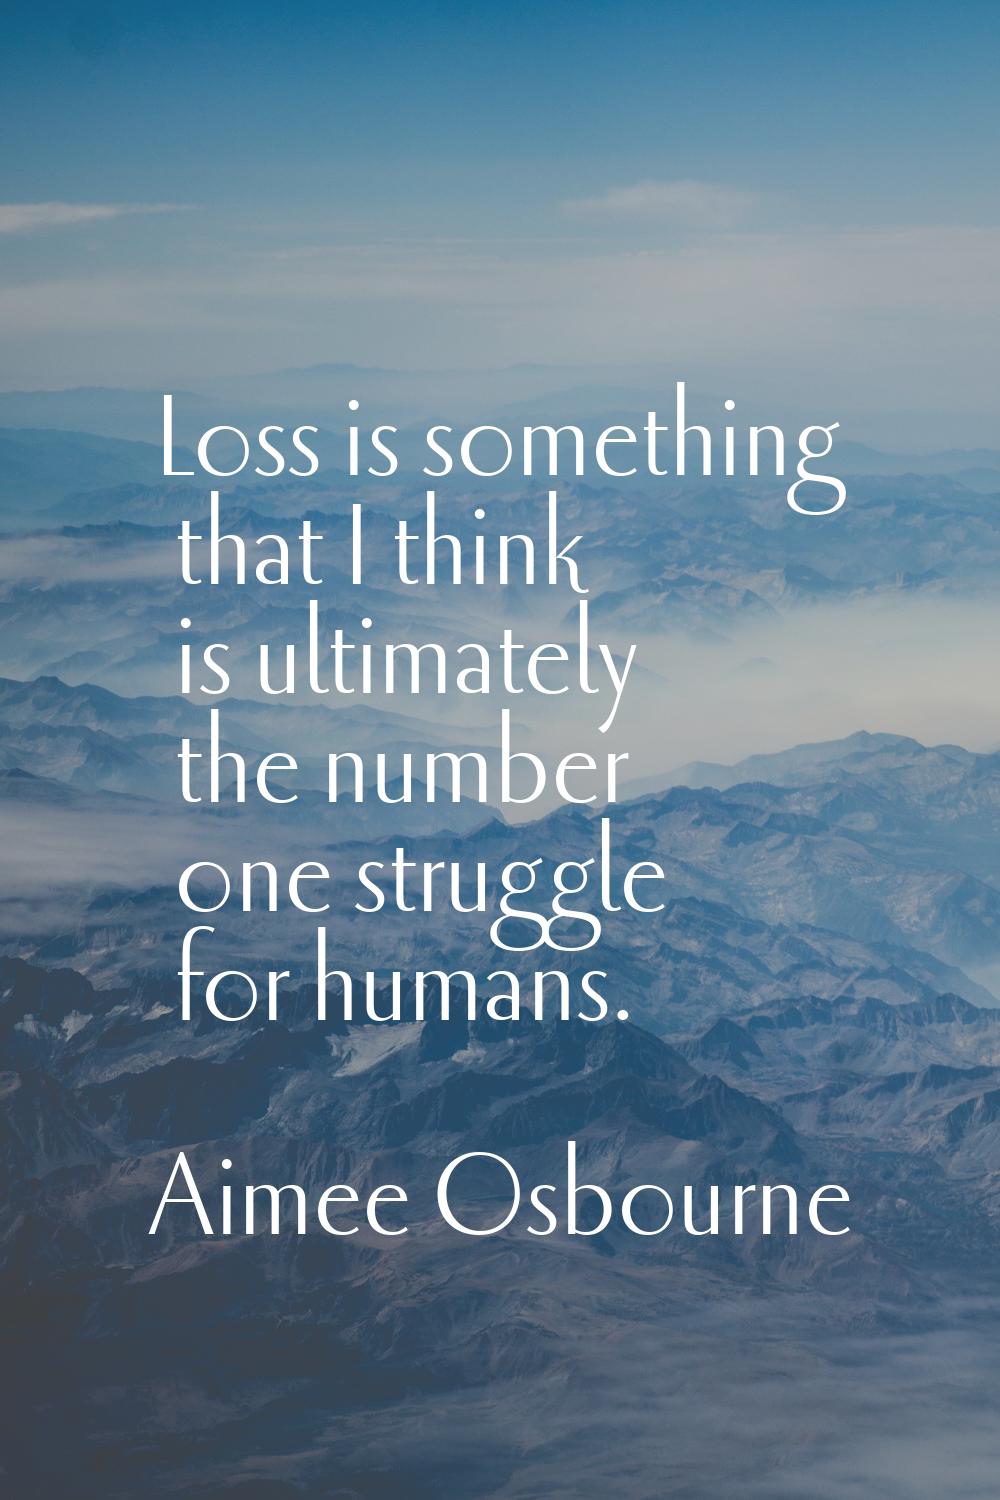 Loss is something that I think is ultimately the number one struggle for humans.